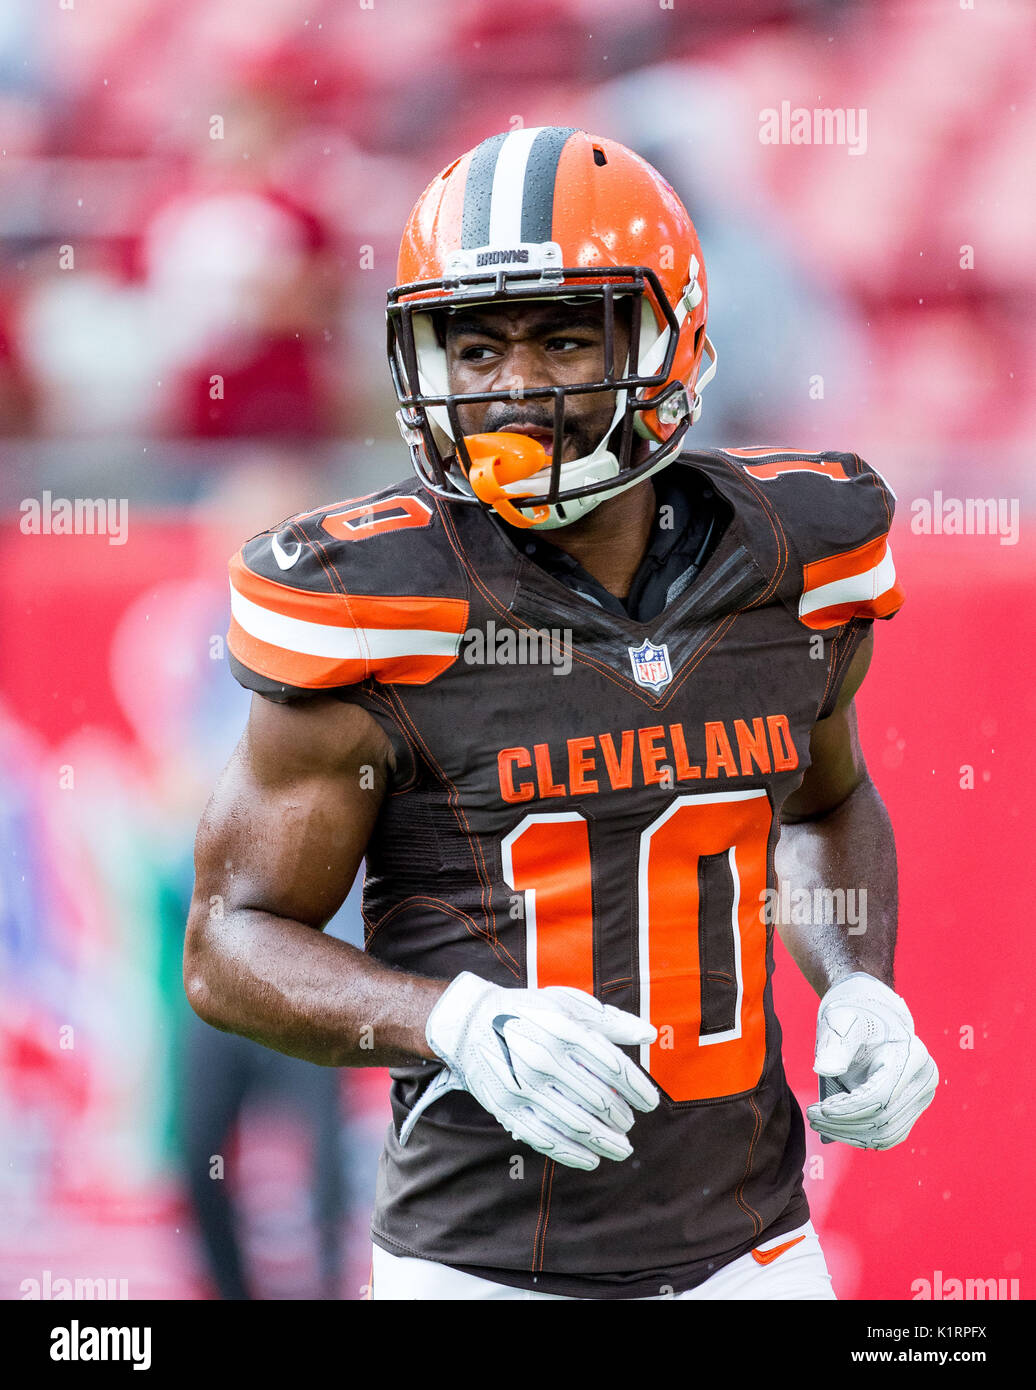 Cleveland Browns wide receiver Rasheed 